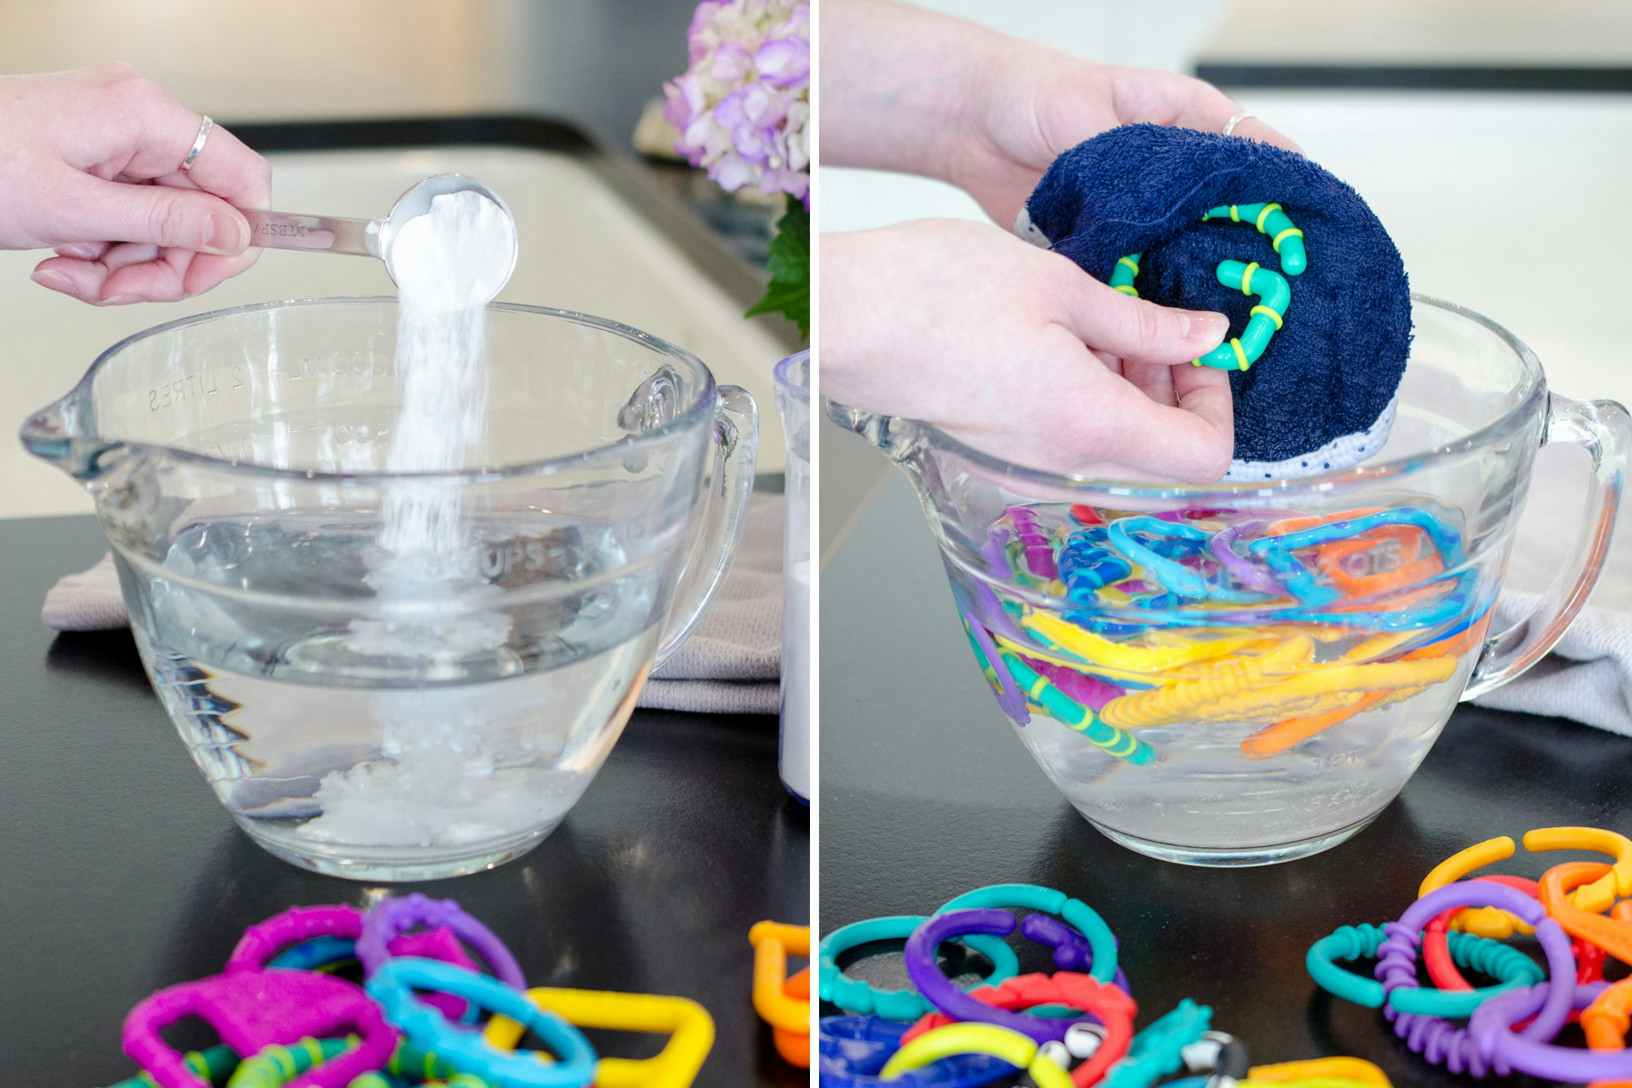 Clean and deodorize baby toys with baking soda.